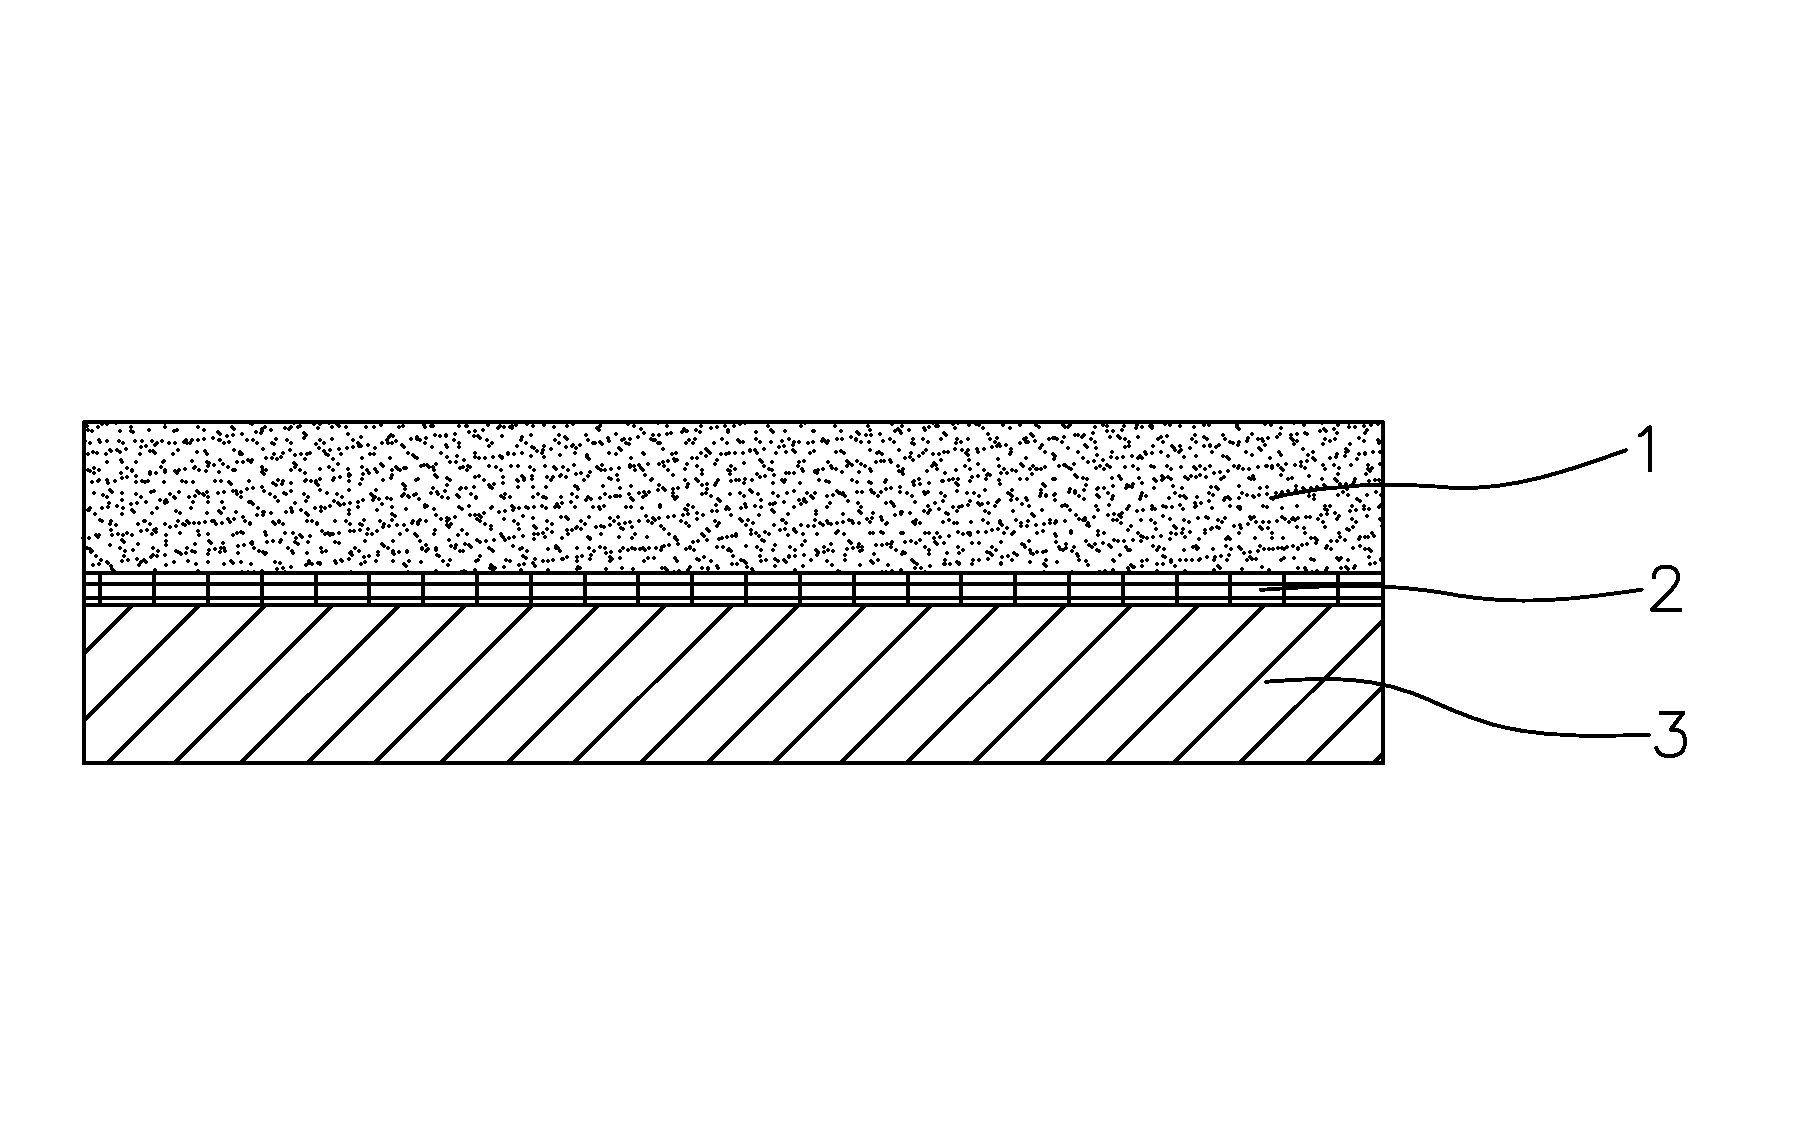 Composite microporous filter material